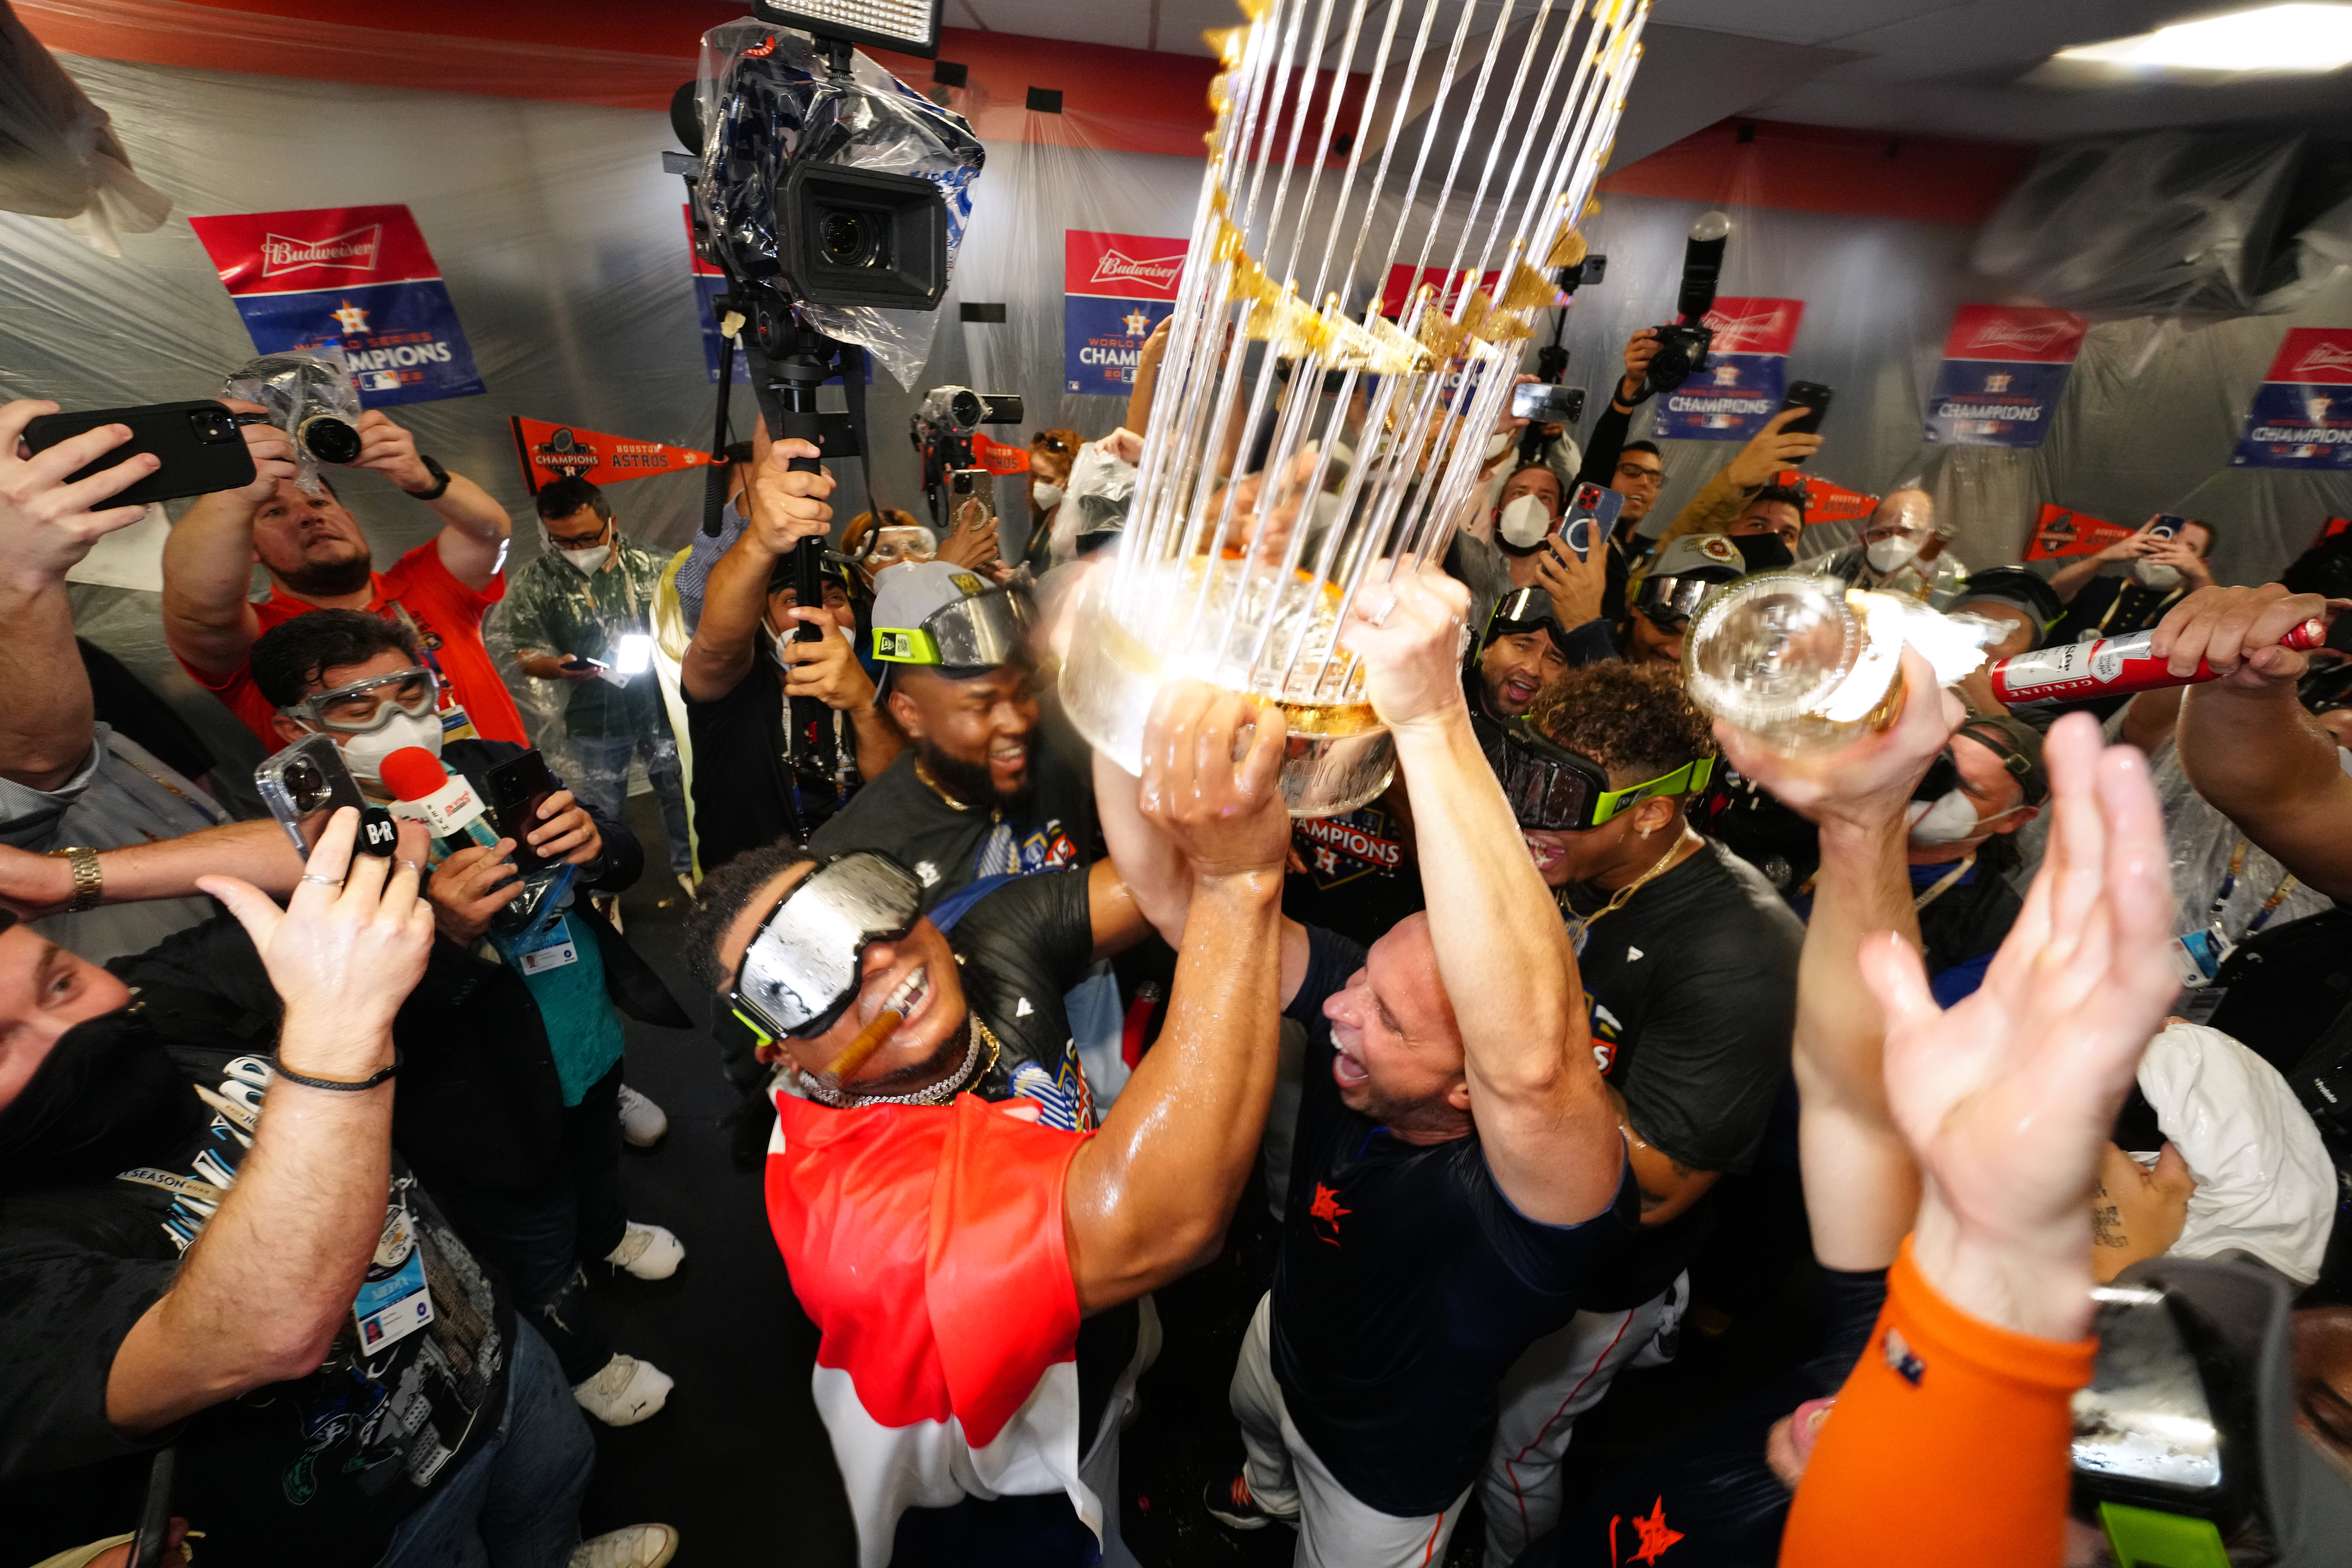 Framber Valdez of the Houston Astros celebrates with teammates in the clubhouse after the Astros defeated the Phillies, 4-1, in Game 6 of the 2022 World Series between the Philadelphia Phillies and the Houston Astros at Minute Maid Park on Saturday, November 5, 2022 in Houston, Texas.